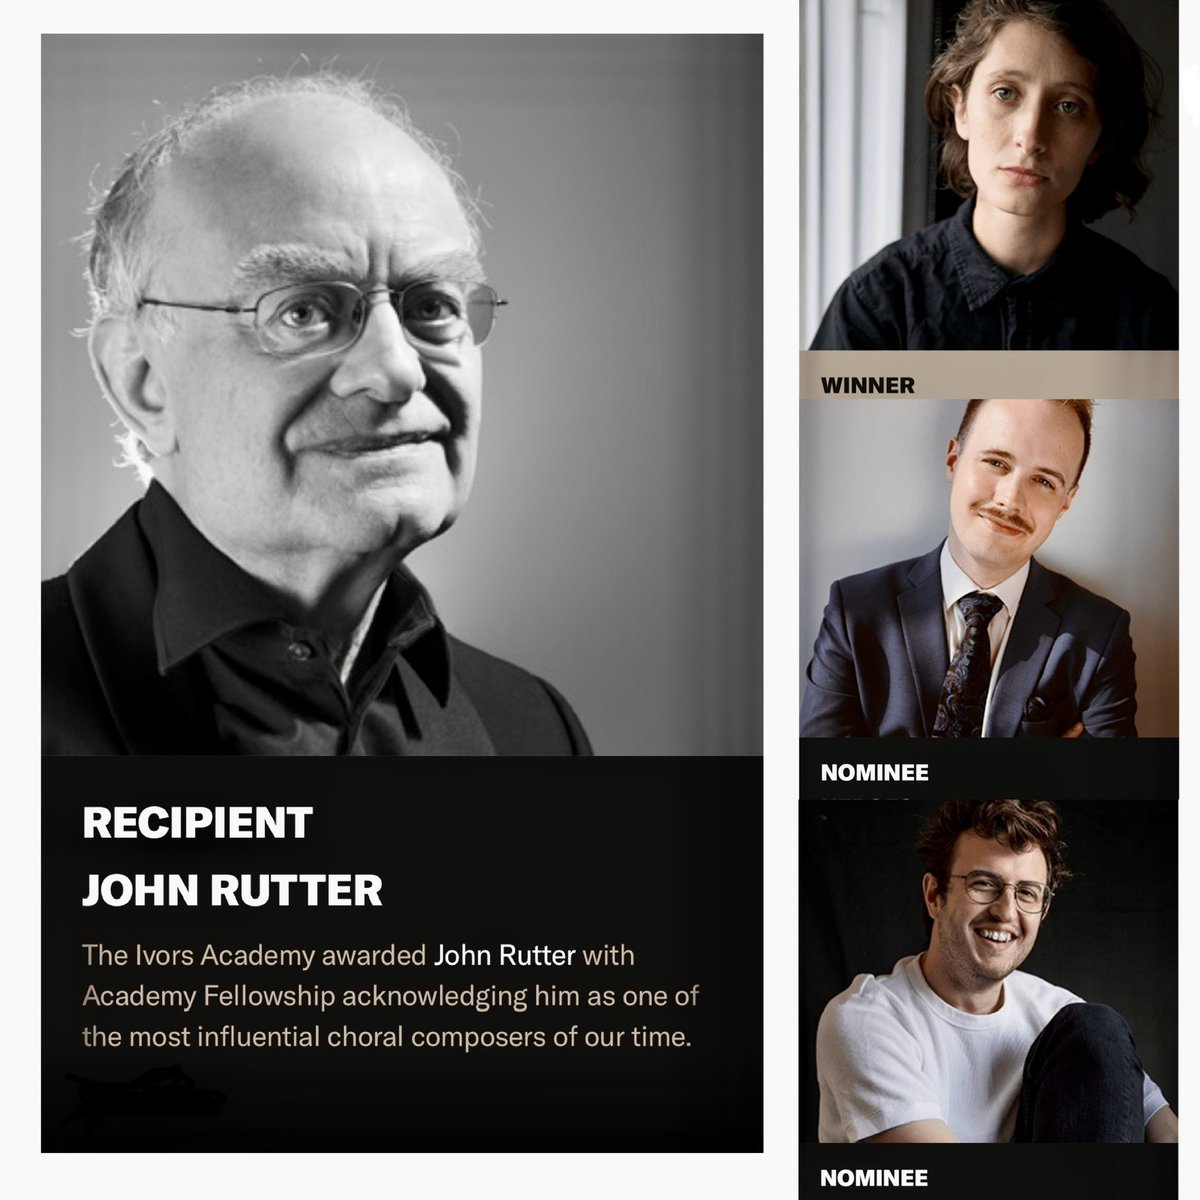 A formidable @IvorsAcademy evening for @ClareCollege @ClareChoir alumni: @johnmrutter awarded Fellowship, @jsphnstphnsn won Best Small Chamber Composition; @castlesounds & @WMarsey nominees in Community+Participation & Chamber Ensemble categories respectively. Congrats all! 👏👏